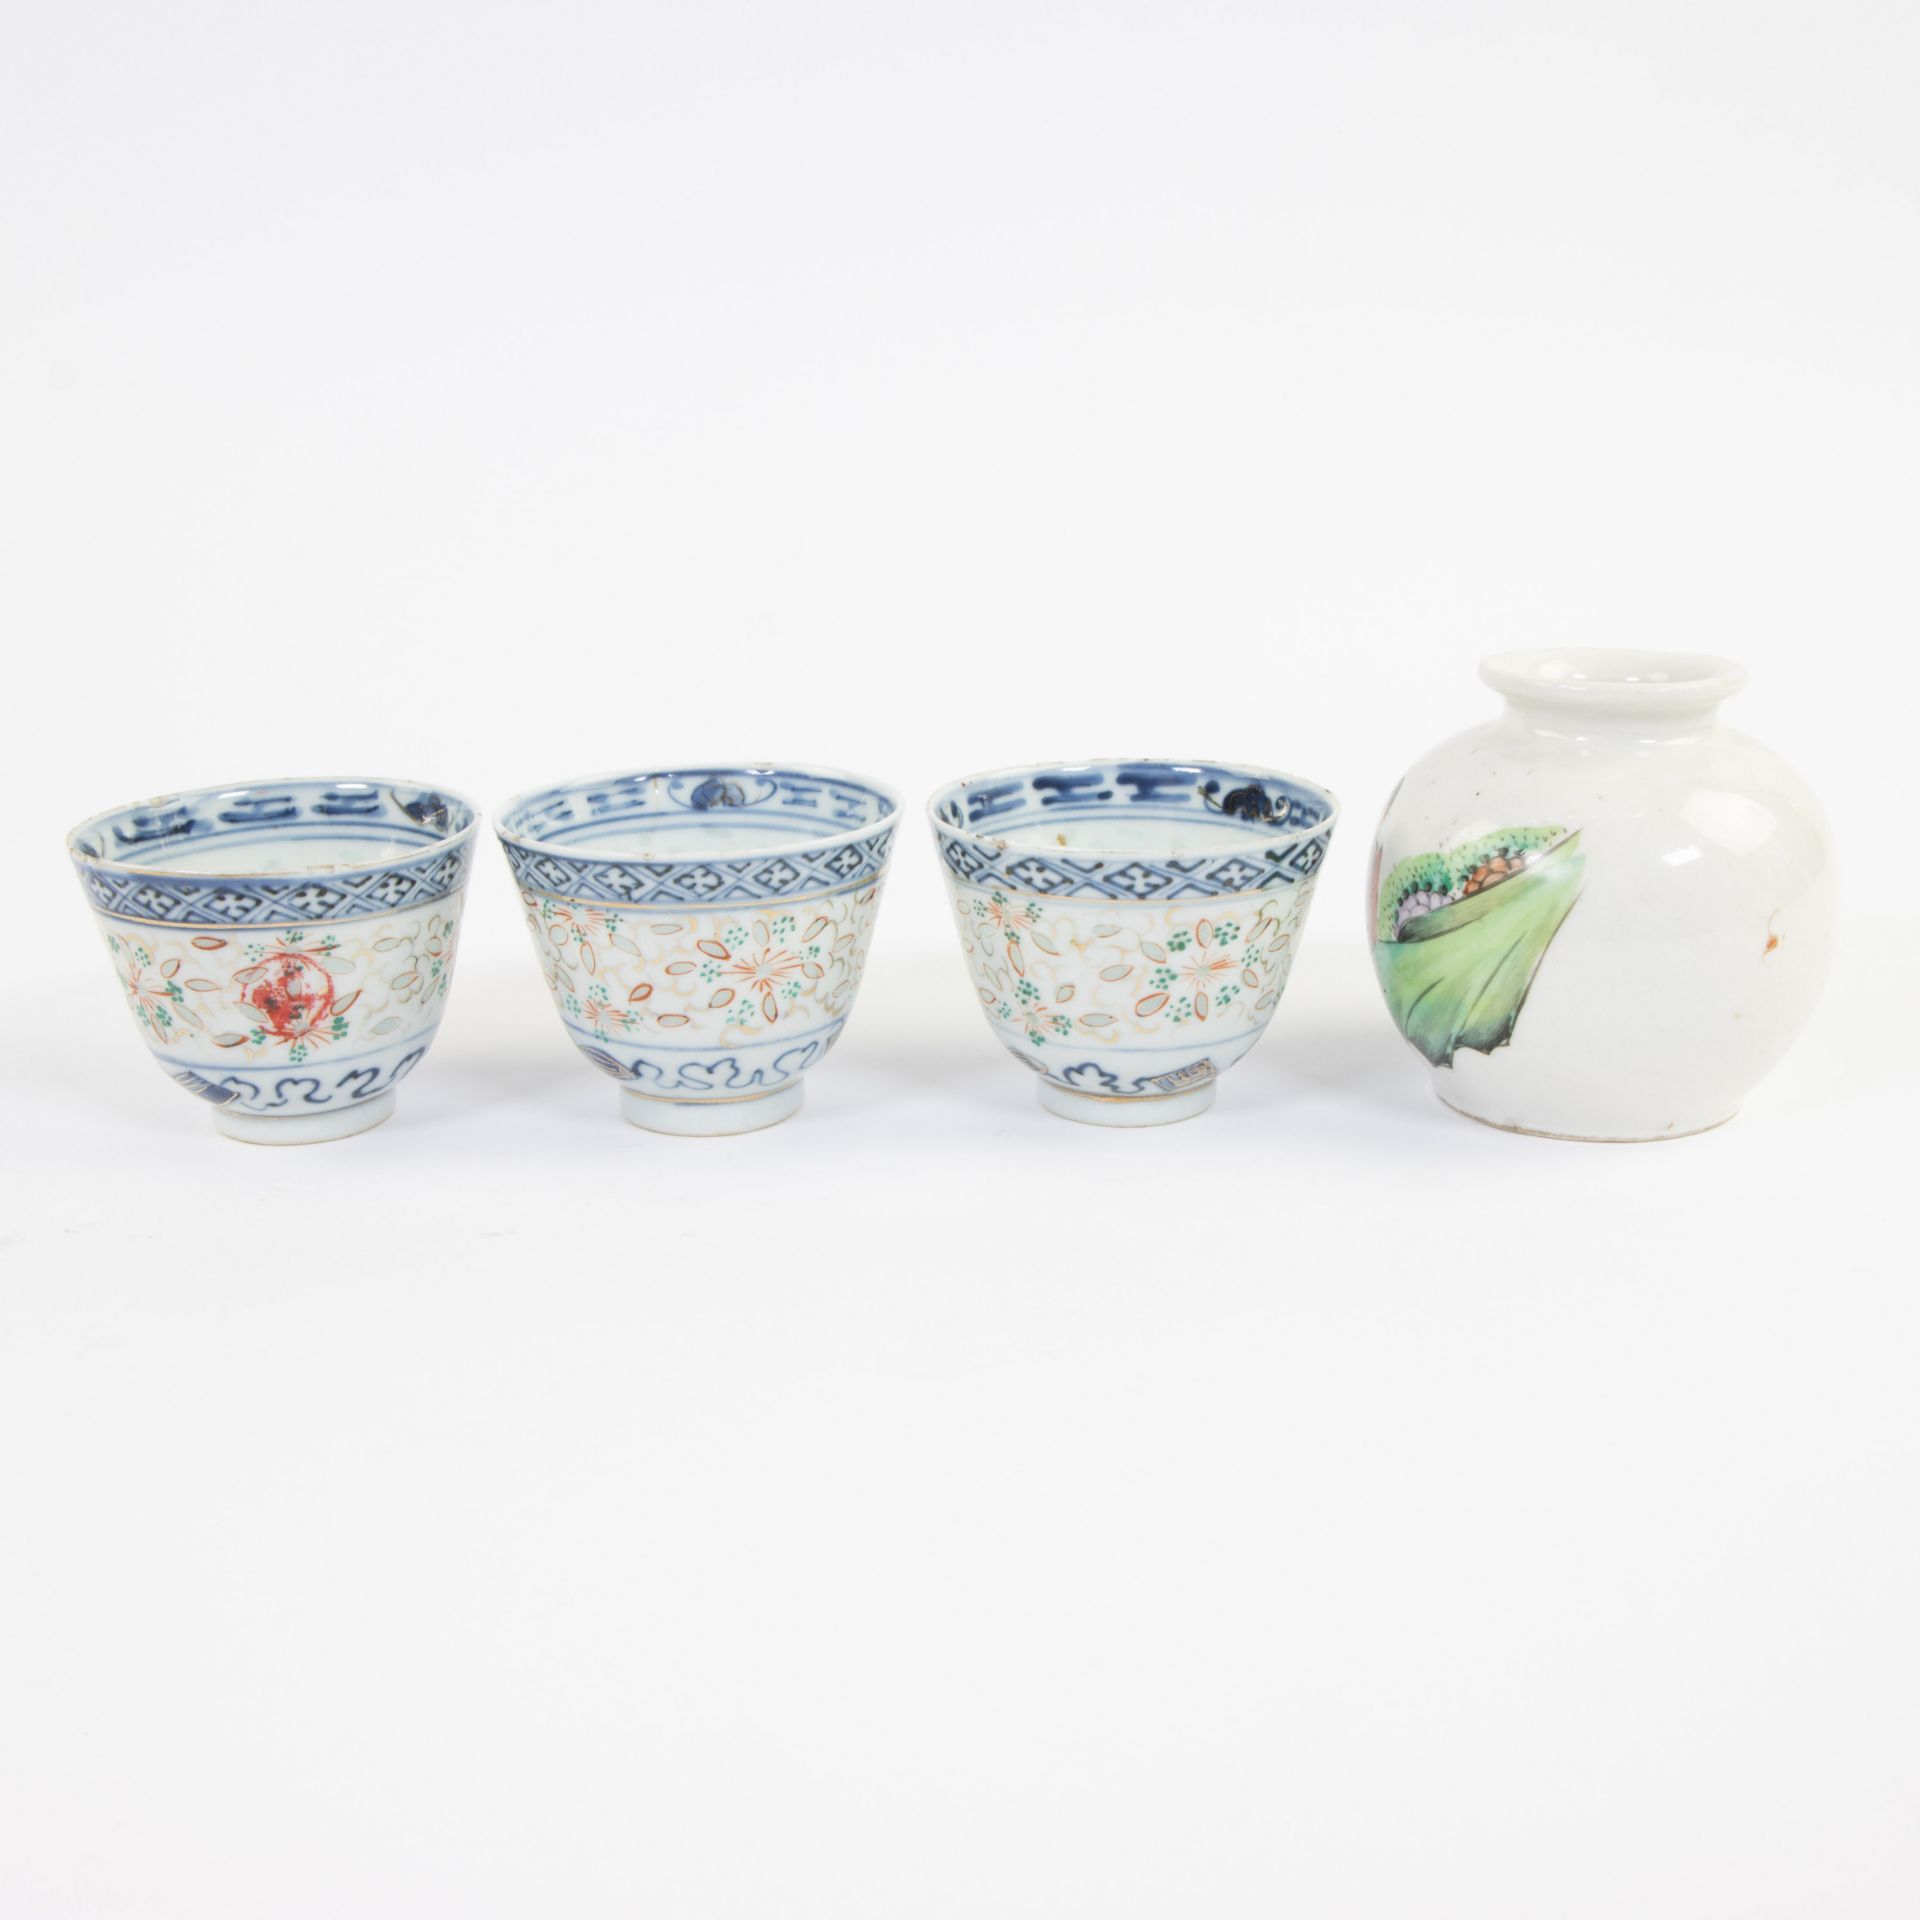 Collection of Chinese porcelain: plates, bowls and vase - Image 7 of 10